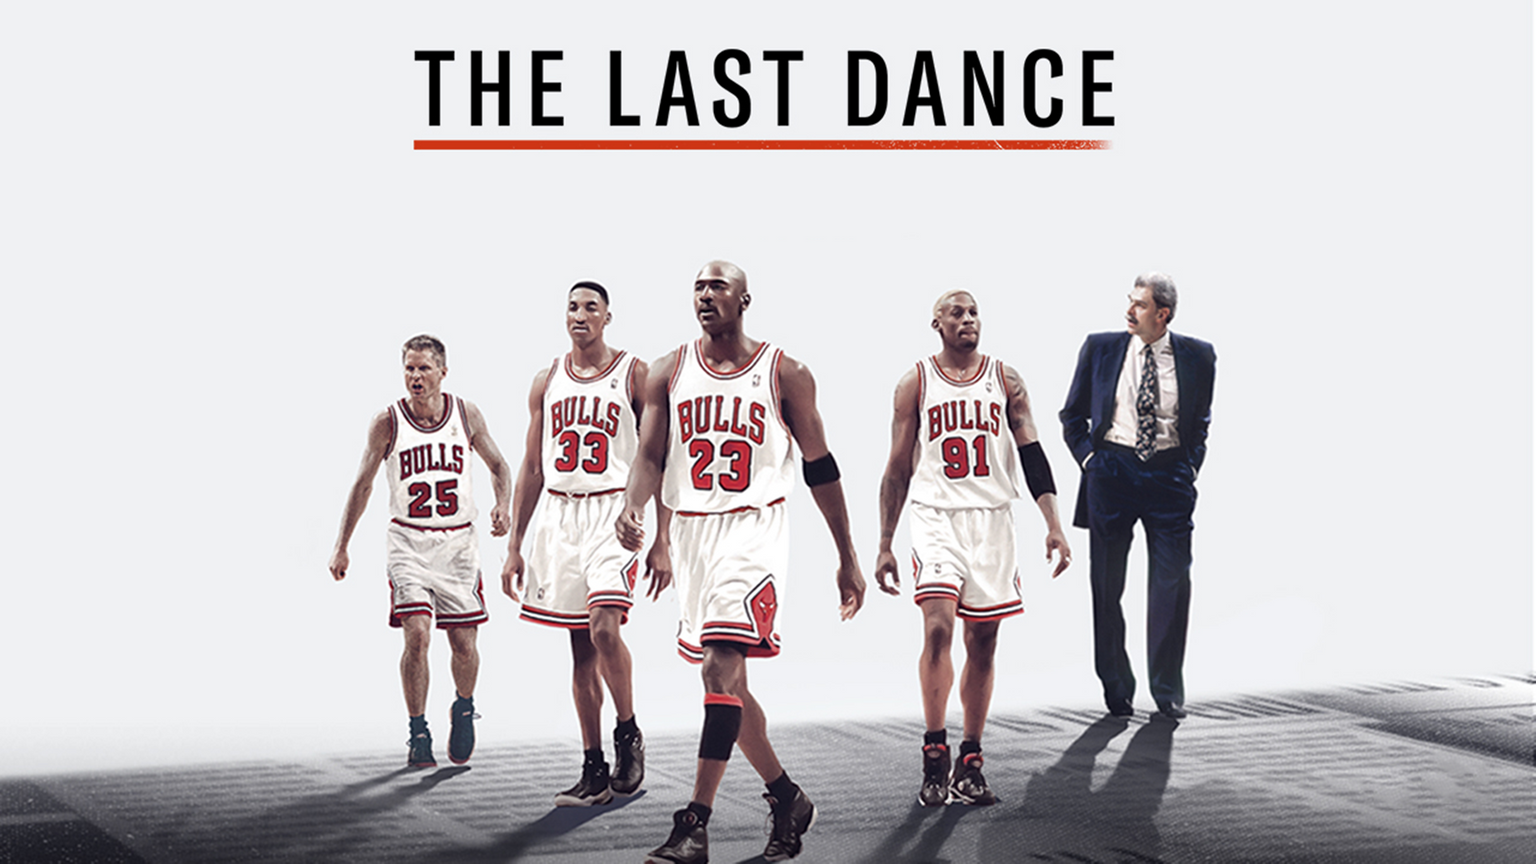 The Last Dance: Was Jordan an idiot or a great leader? — Hive